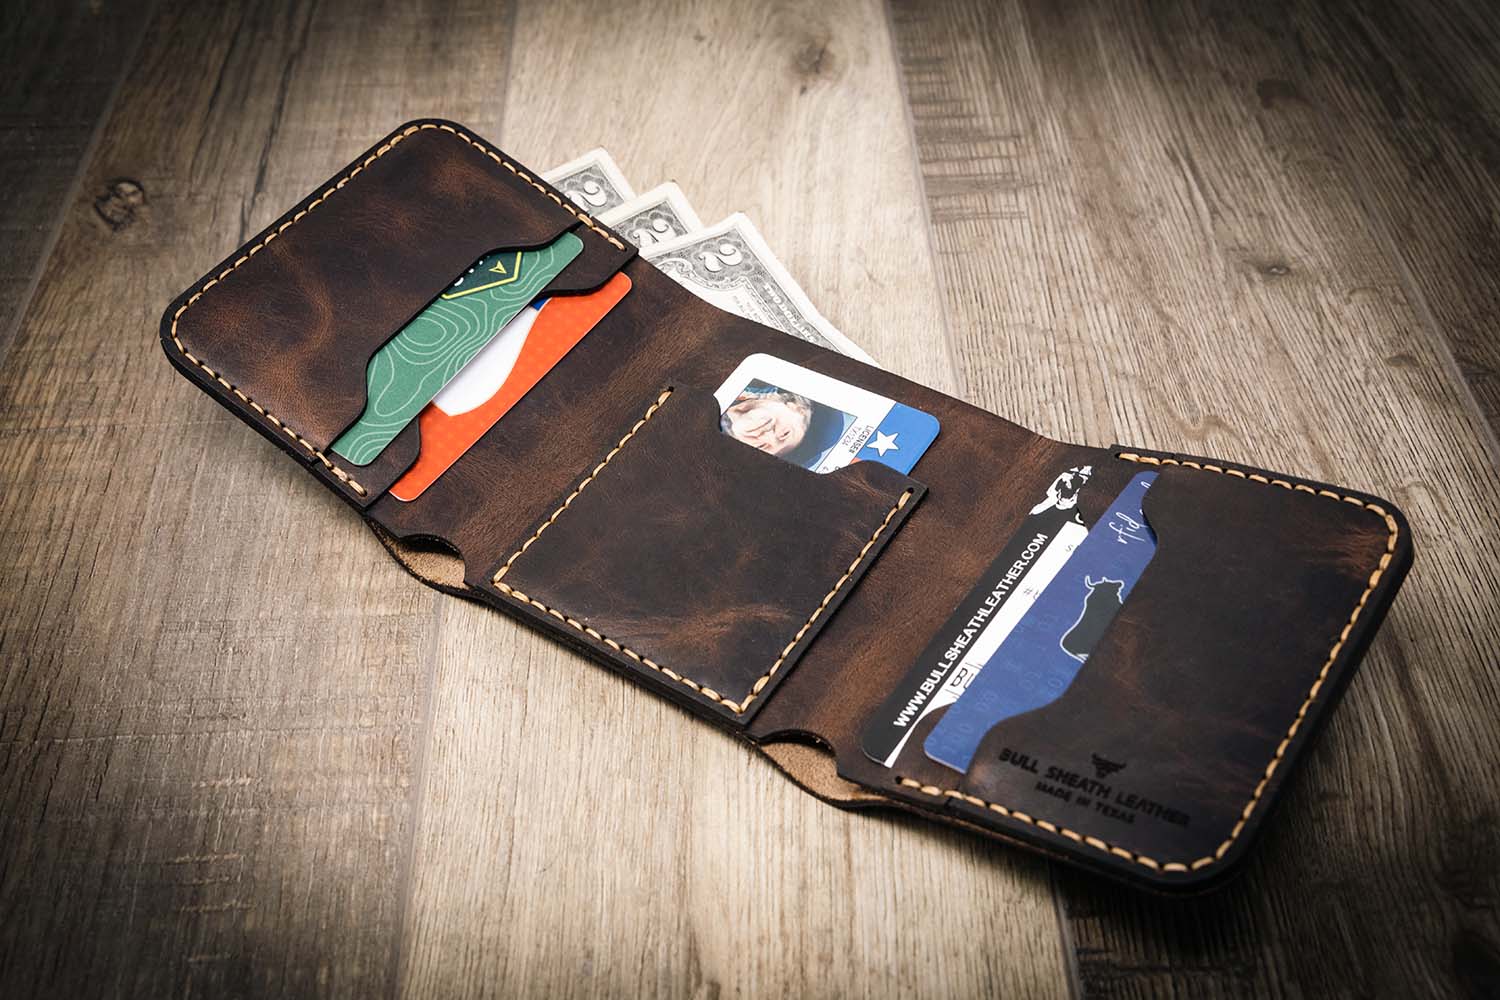 The Trinity Men's Trifold Leather Wallet